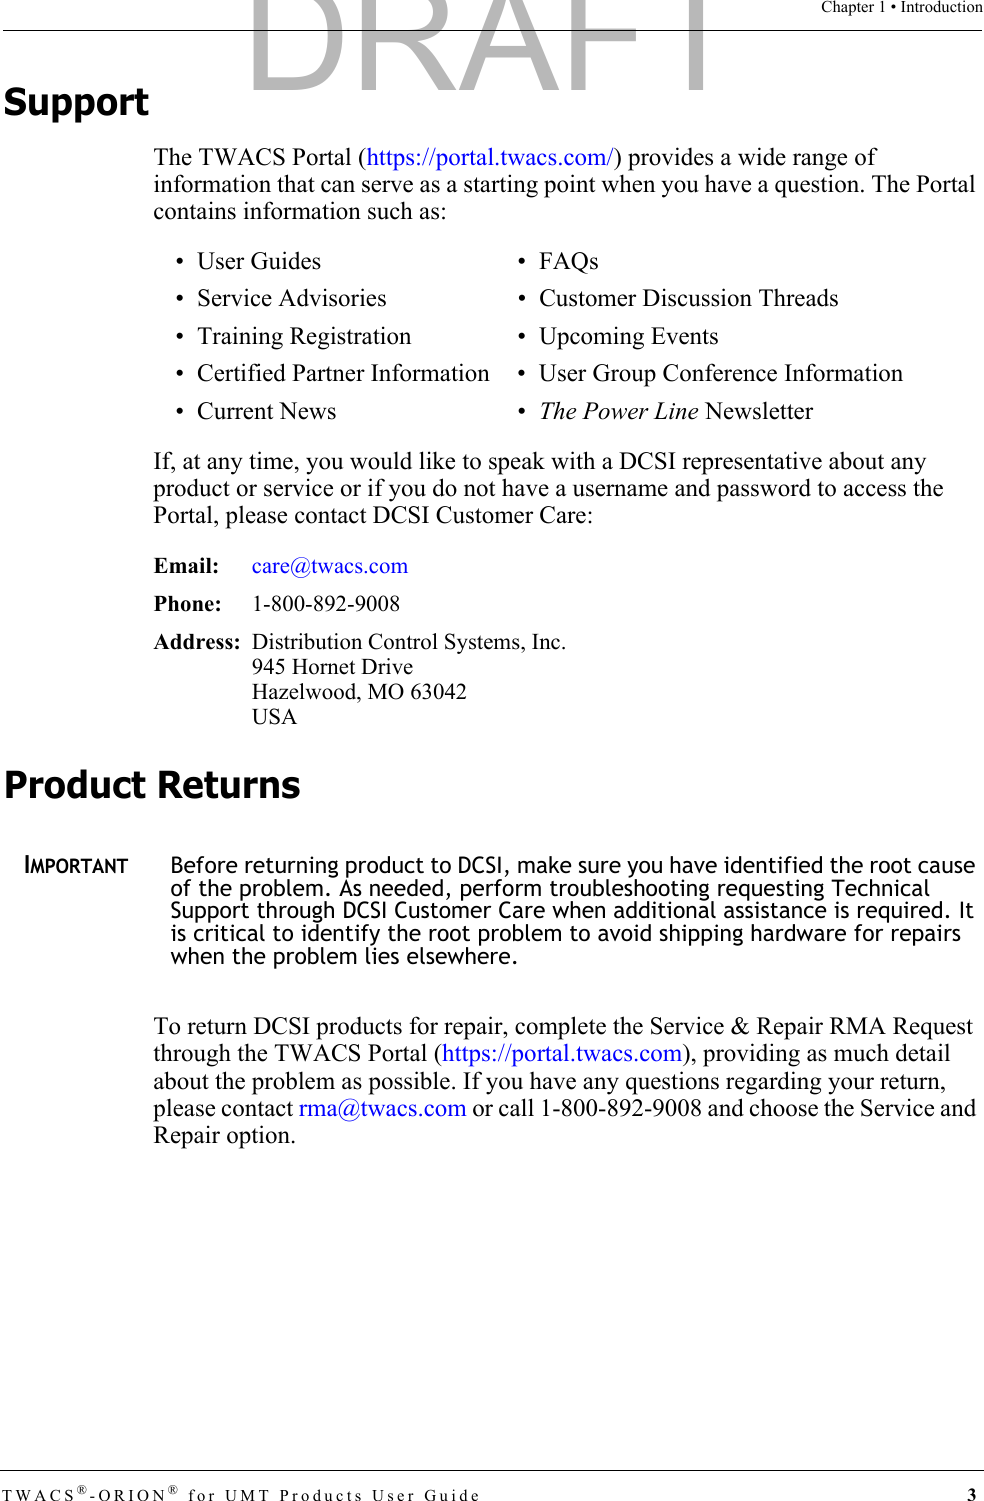 TWACS®-ORION® for UMT Products User Guide  3Chapter 1 • IntroductionSupportThe TWACS Portal (https://portal.twacs.com/) provides a wide range of information that can serve as a starting point when you have a question. The Portal contains information such as:If, at any time, you would like to speak with a DCSI representative about any product or service or if you do not have a username and password to access the Portal, please contact DCSI Customer Care:Product ReturnsIMPORTANTBefore returning product to DCSI, make sure you have identified the root cause of the problem. As needed, perform troubleshooting requesting Technical Support through DCSI Customer Care when additional assistance is required. It is critical to identify the root problem to avoid shipping hardware for repairs when the problem lies elsewhere.To return DCSI products for repair, complete the Service &amp; Repair RMA Request through the TWACS Portal (https://portal.twacs.com), providing as much detail about the problem as possible. If you have any questions regarding your return, please contact rma@twacs.com or call 1-800-892-9008 and choose the Service and Repair option.•User Guides •FAQs • Service Advisories • Customer Discussion Threads• Training Registration • Upcoming Events• Certified Partner Information • User Group Conference Information• Current News • The Power Line NewsletterEmail: care@twacs.comPhone:  1-800-892-9008Address: Distribution Control Systems, Inc.945 Hornet DriveHazelwood, MO 63042USADRAFT